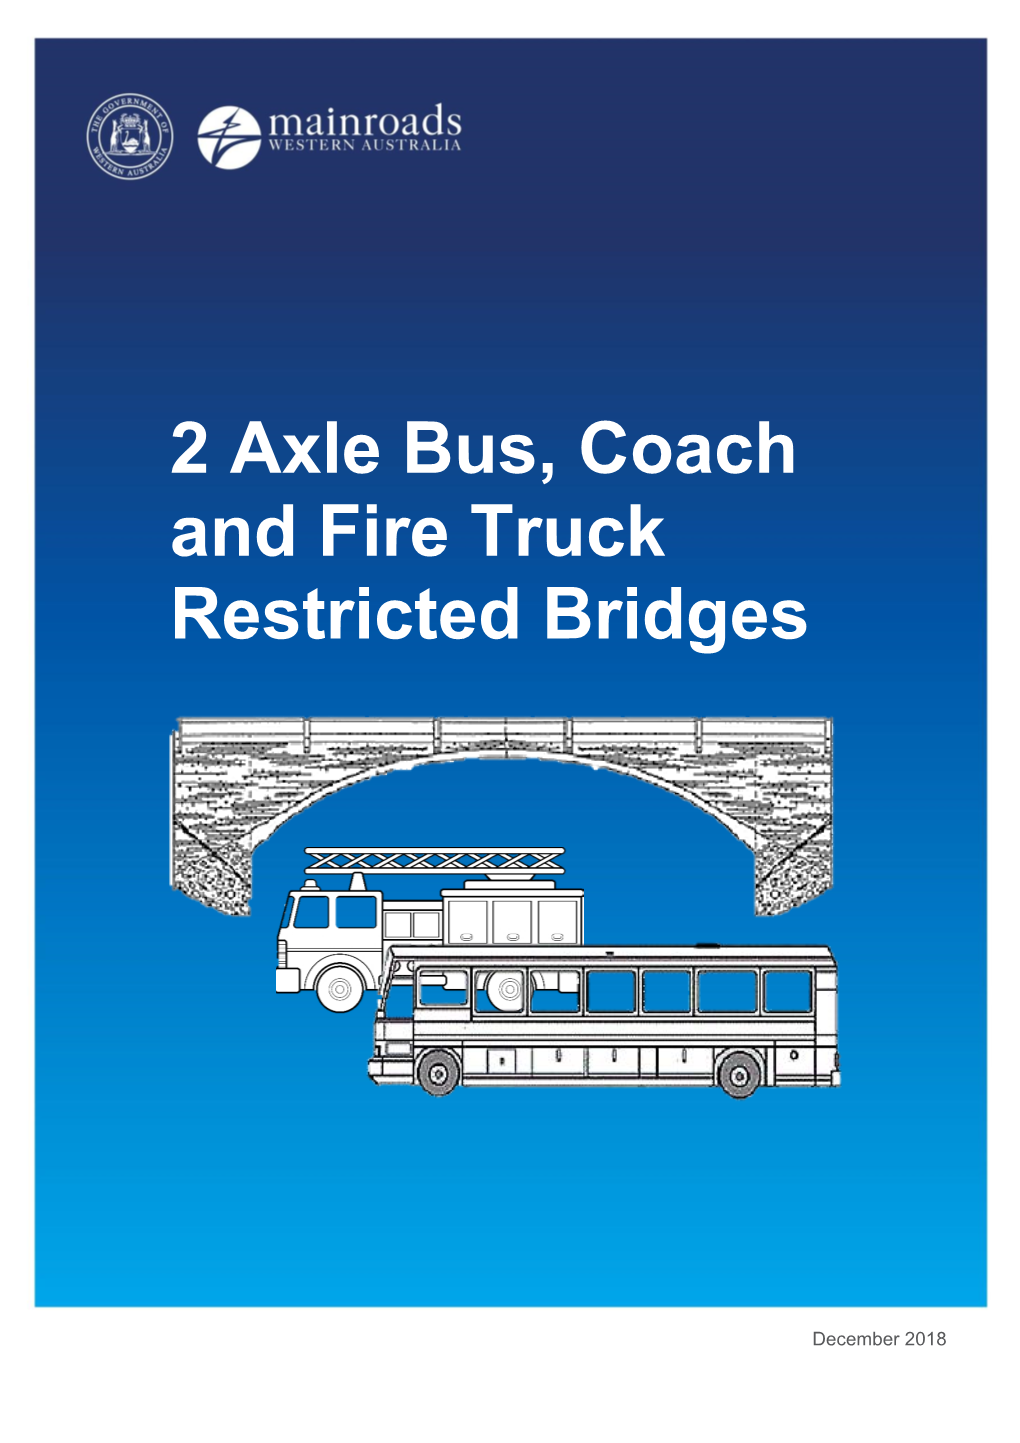 2 Axle Bus, Coach and Fire Truck Restricted Bridges